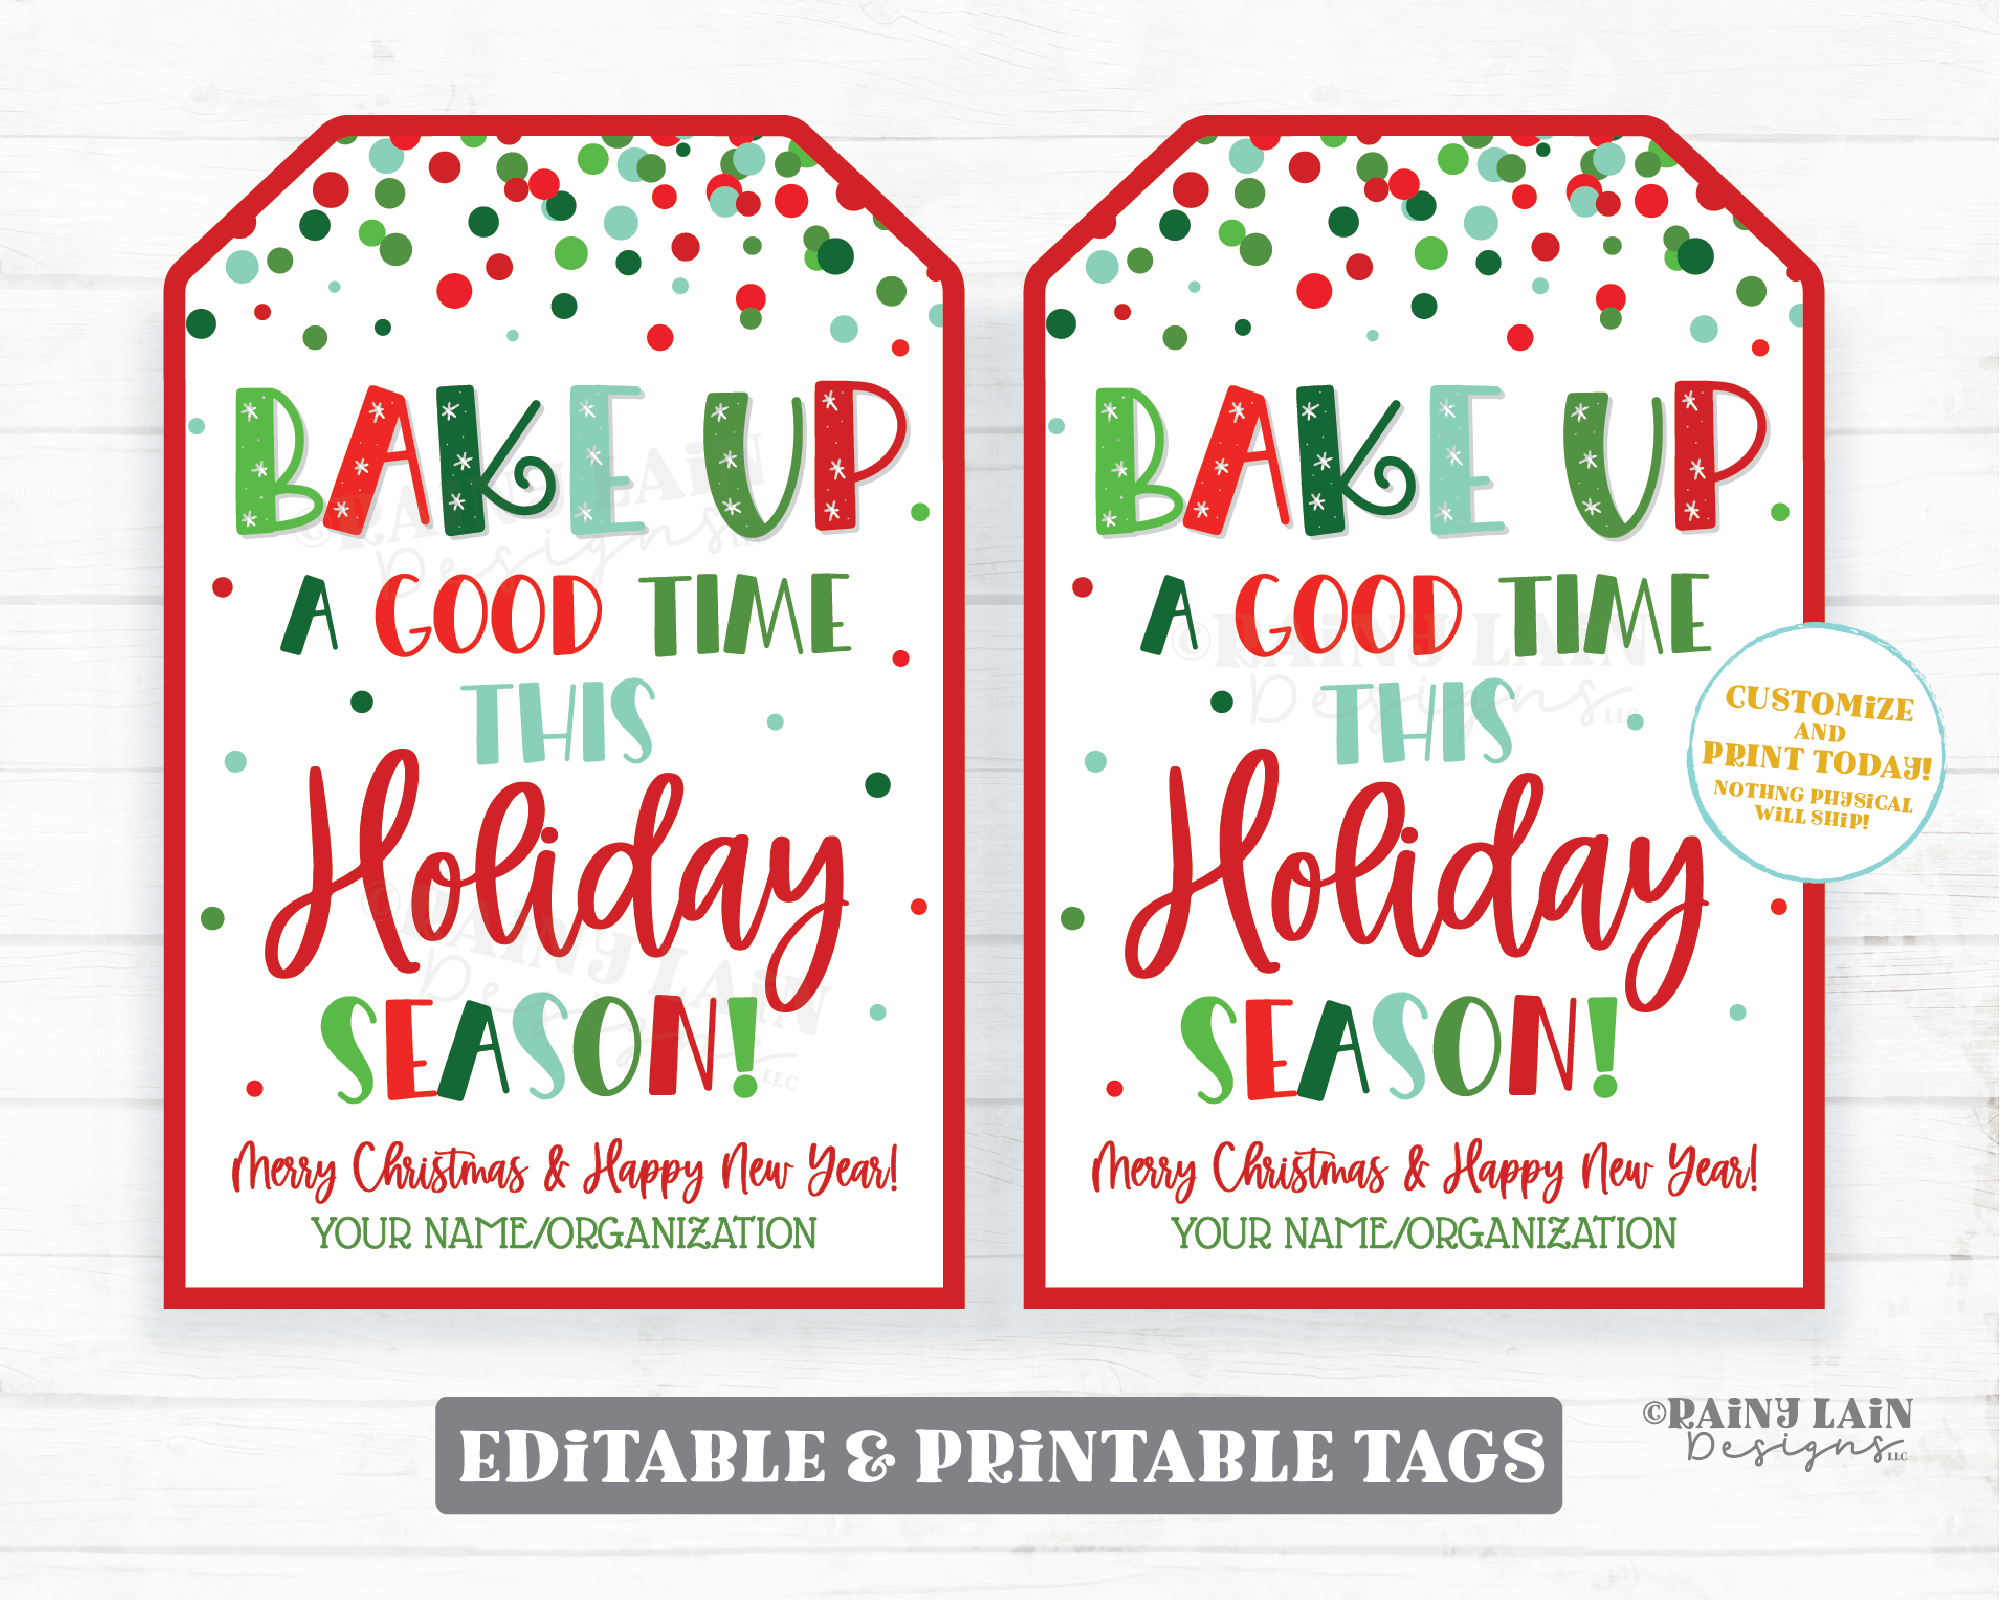 Bake Up a Good Time This Holiday Season Tags Christmas Baked Goods Cookie Kit Baking Gift Holiday Teacher Coach Staff Co-worker Neighbor